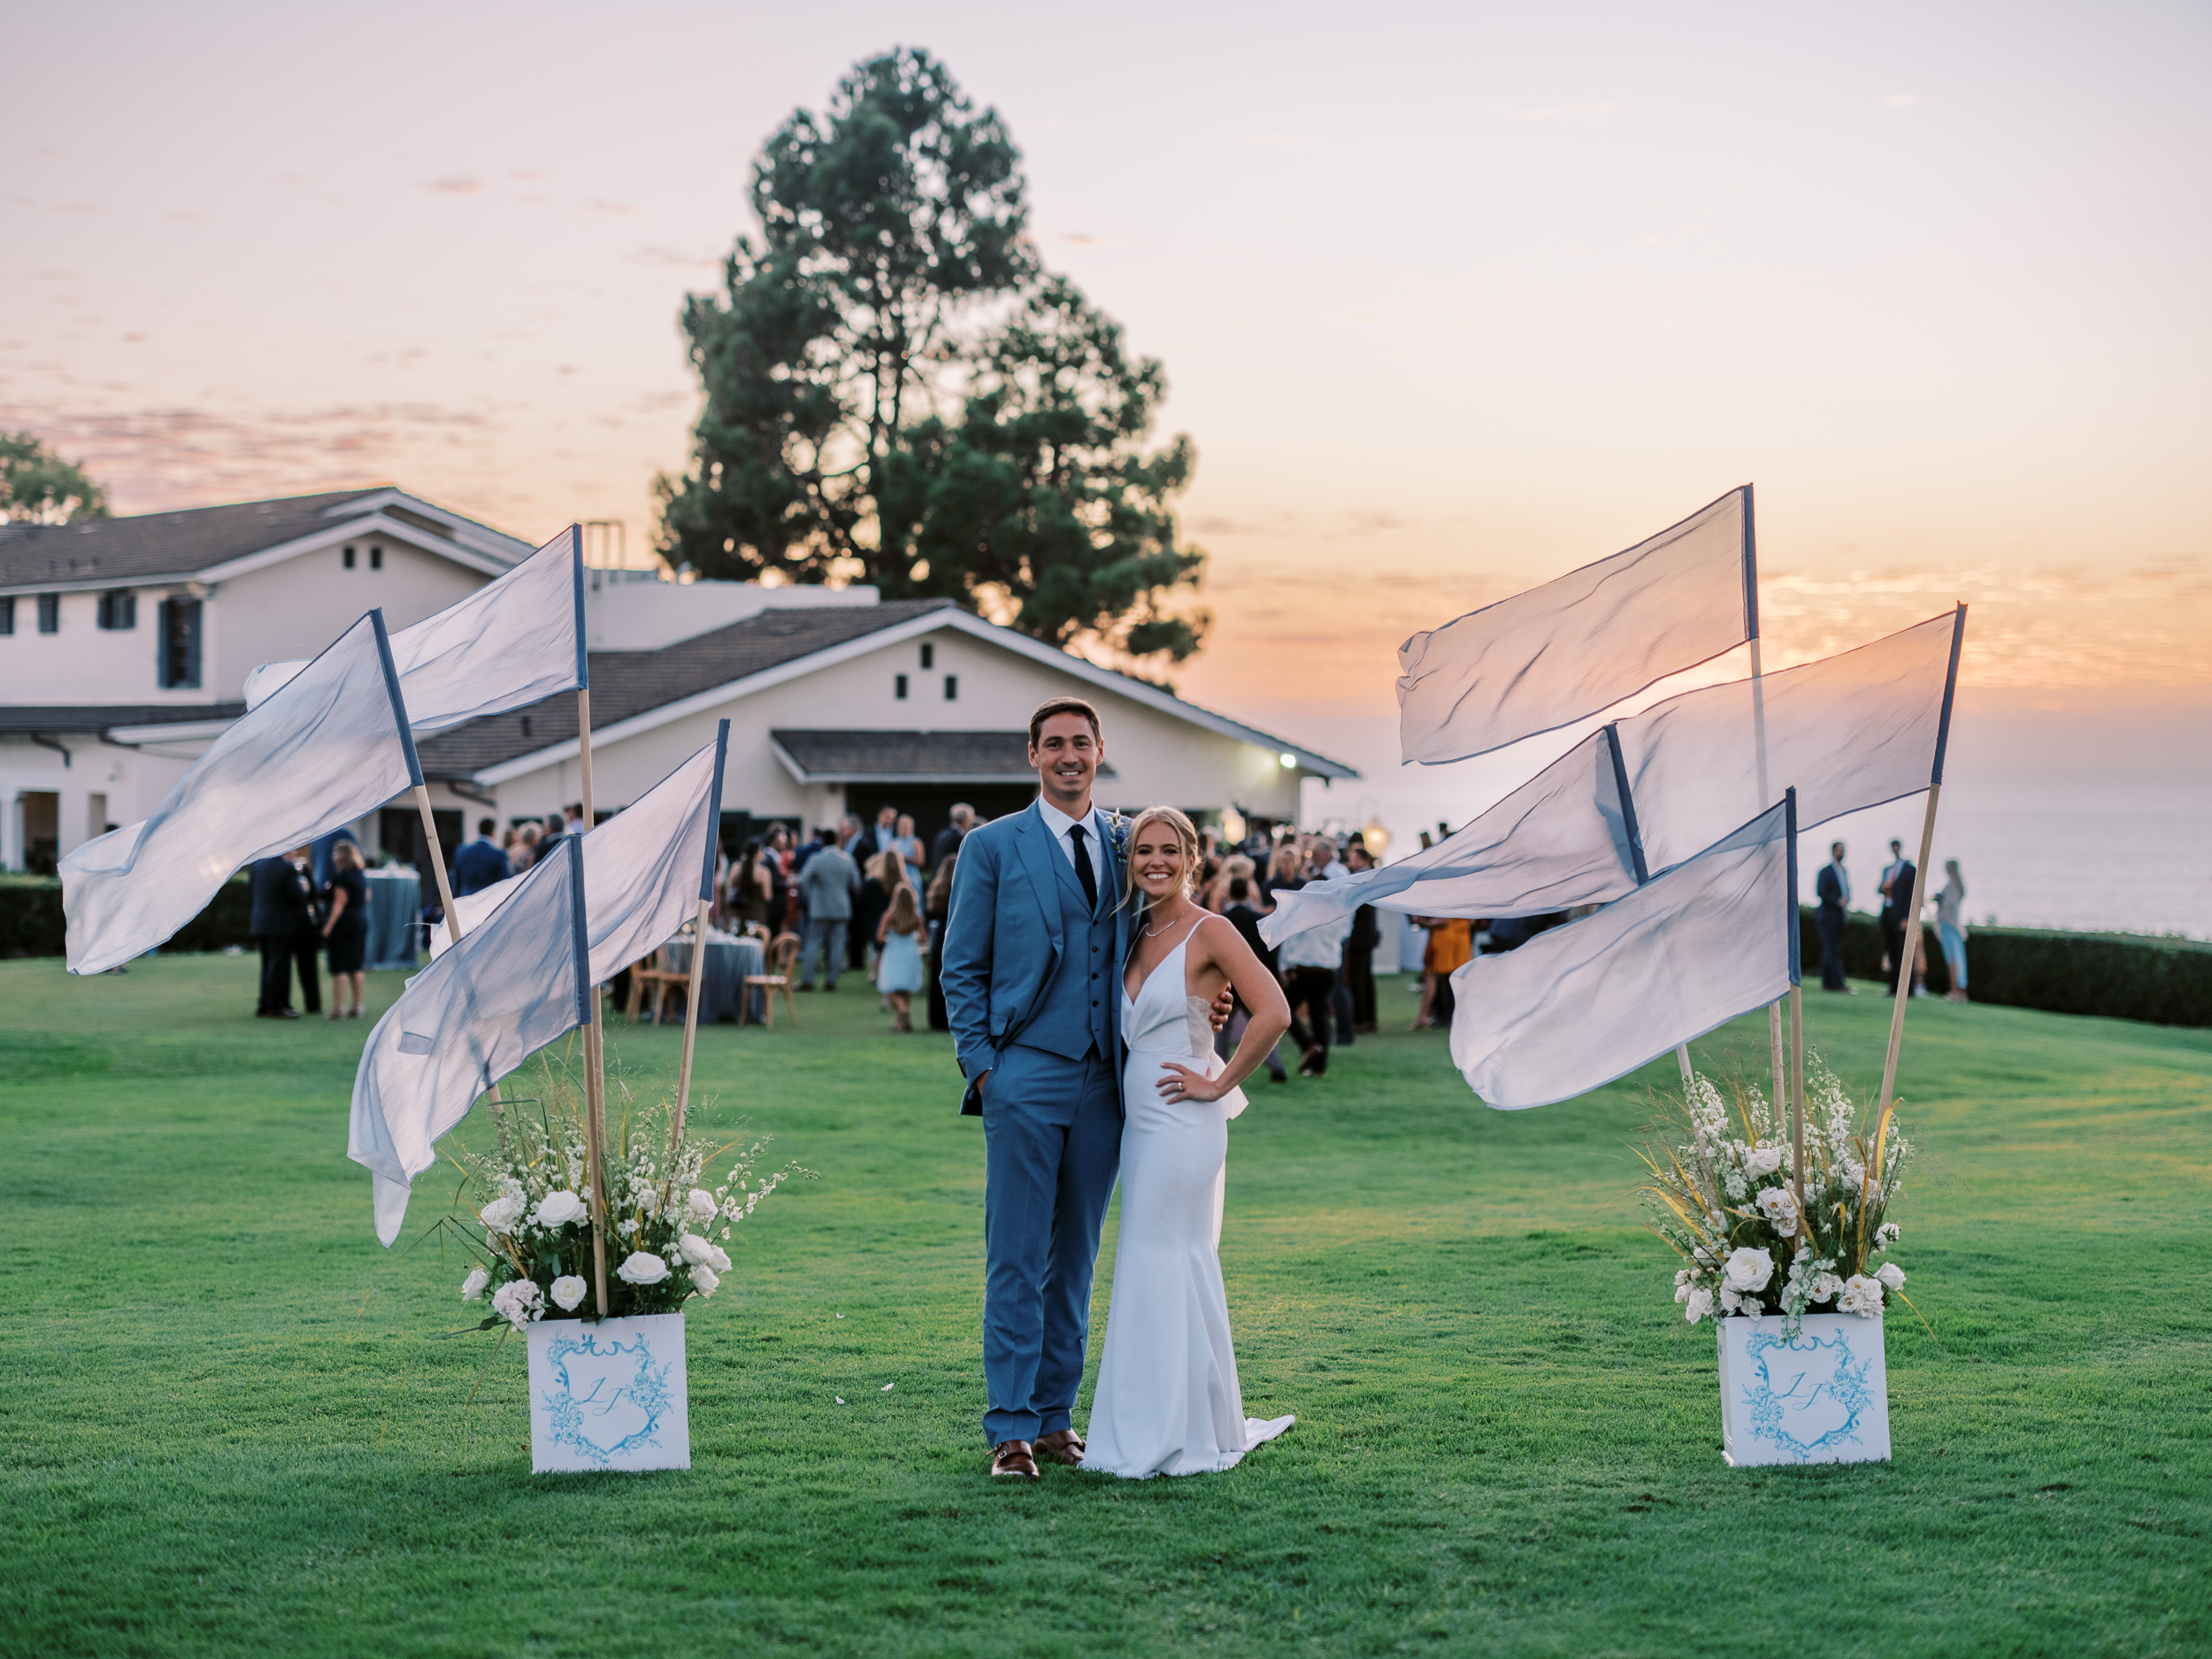 La Jolla Country Club Bride and Groom Flags at Sunset